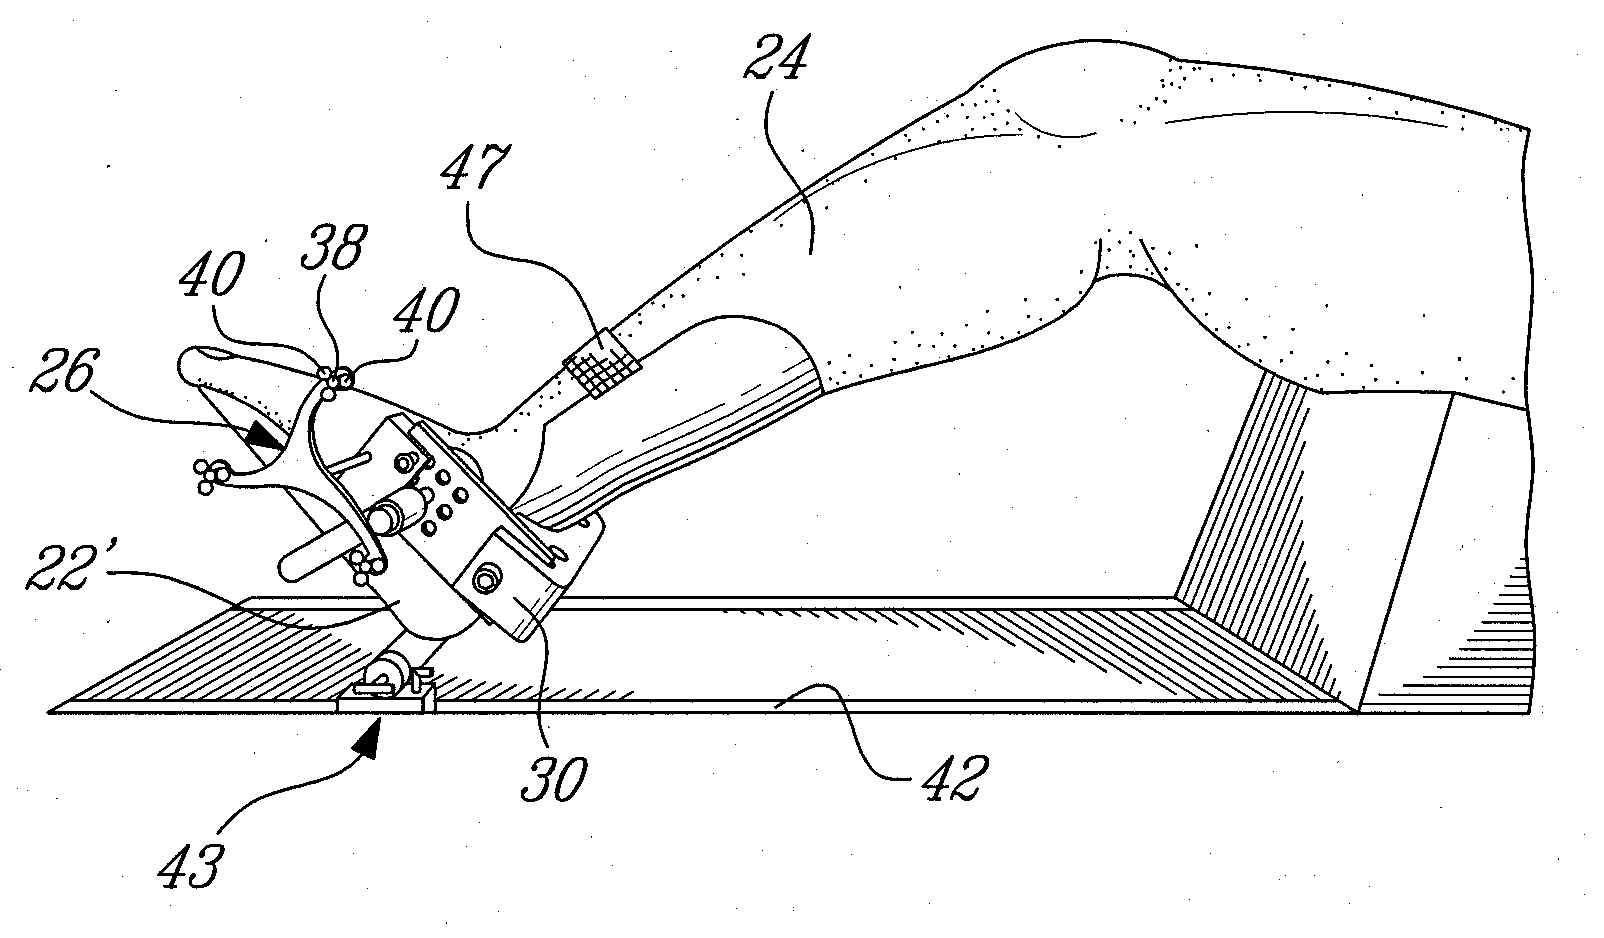 Trackable reference device for computer-assisted surgery